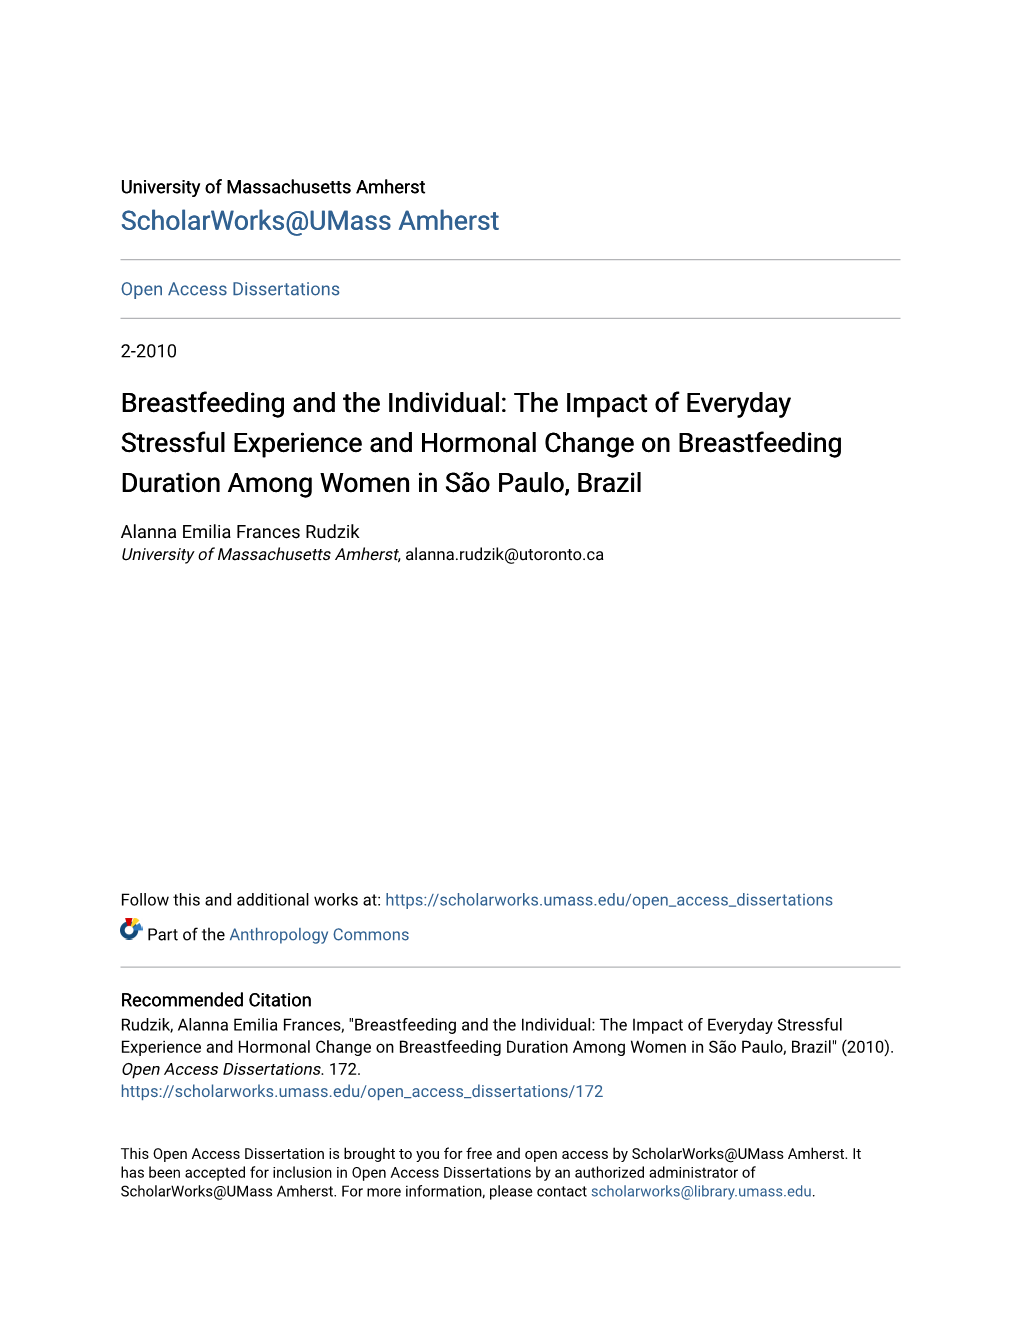 Breastfeeding and the Individual: the Impact of Everyday Stressful Experience and Hormonal Change on Breastfeeding Duration Among Women in São Paulo, Brazil